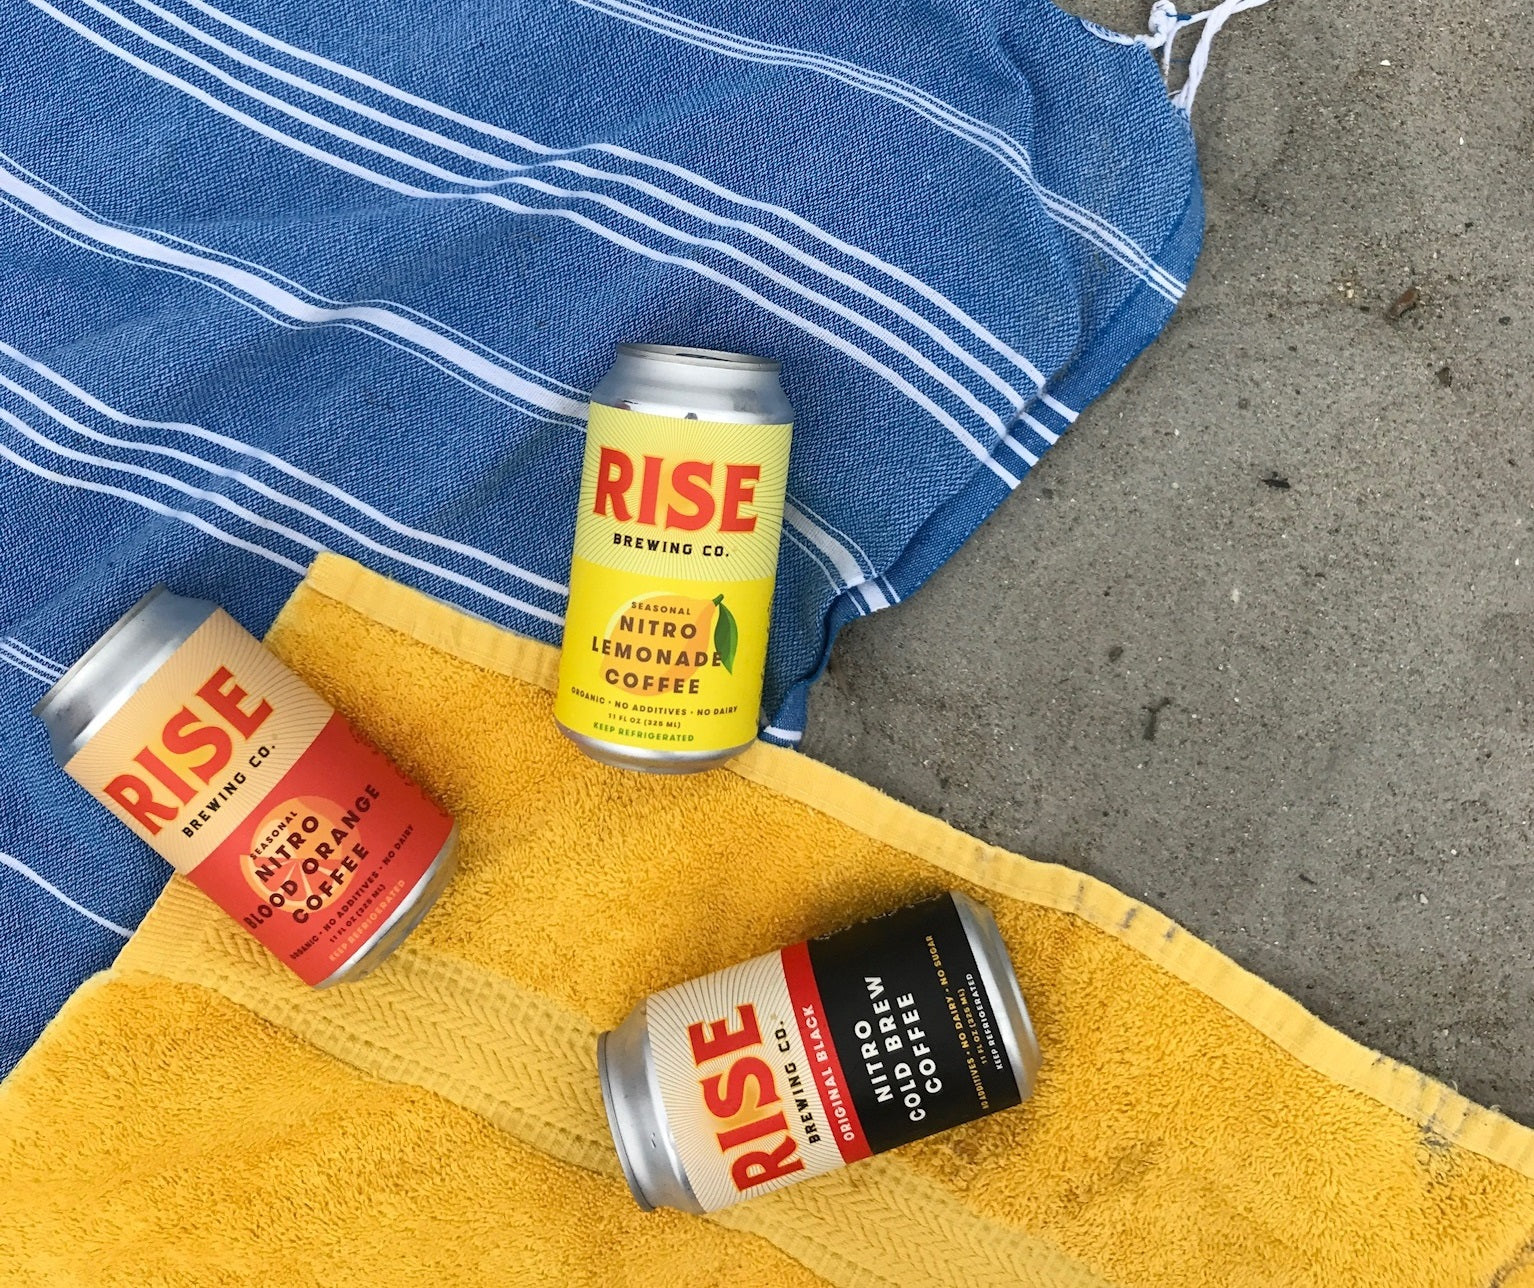 RISE Brewing Co. nitro cold brew coffee in a can in Original Black, Blood Orange, and Lemonade flavors